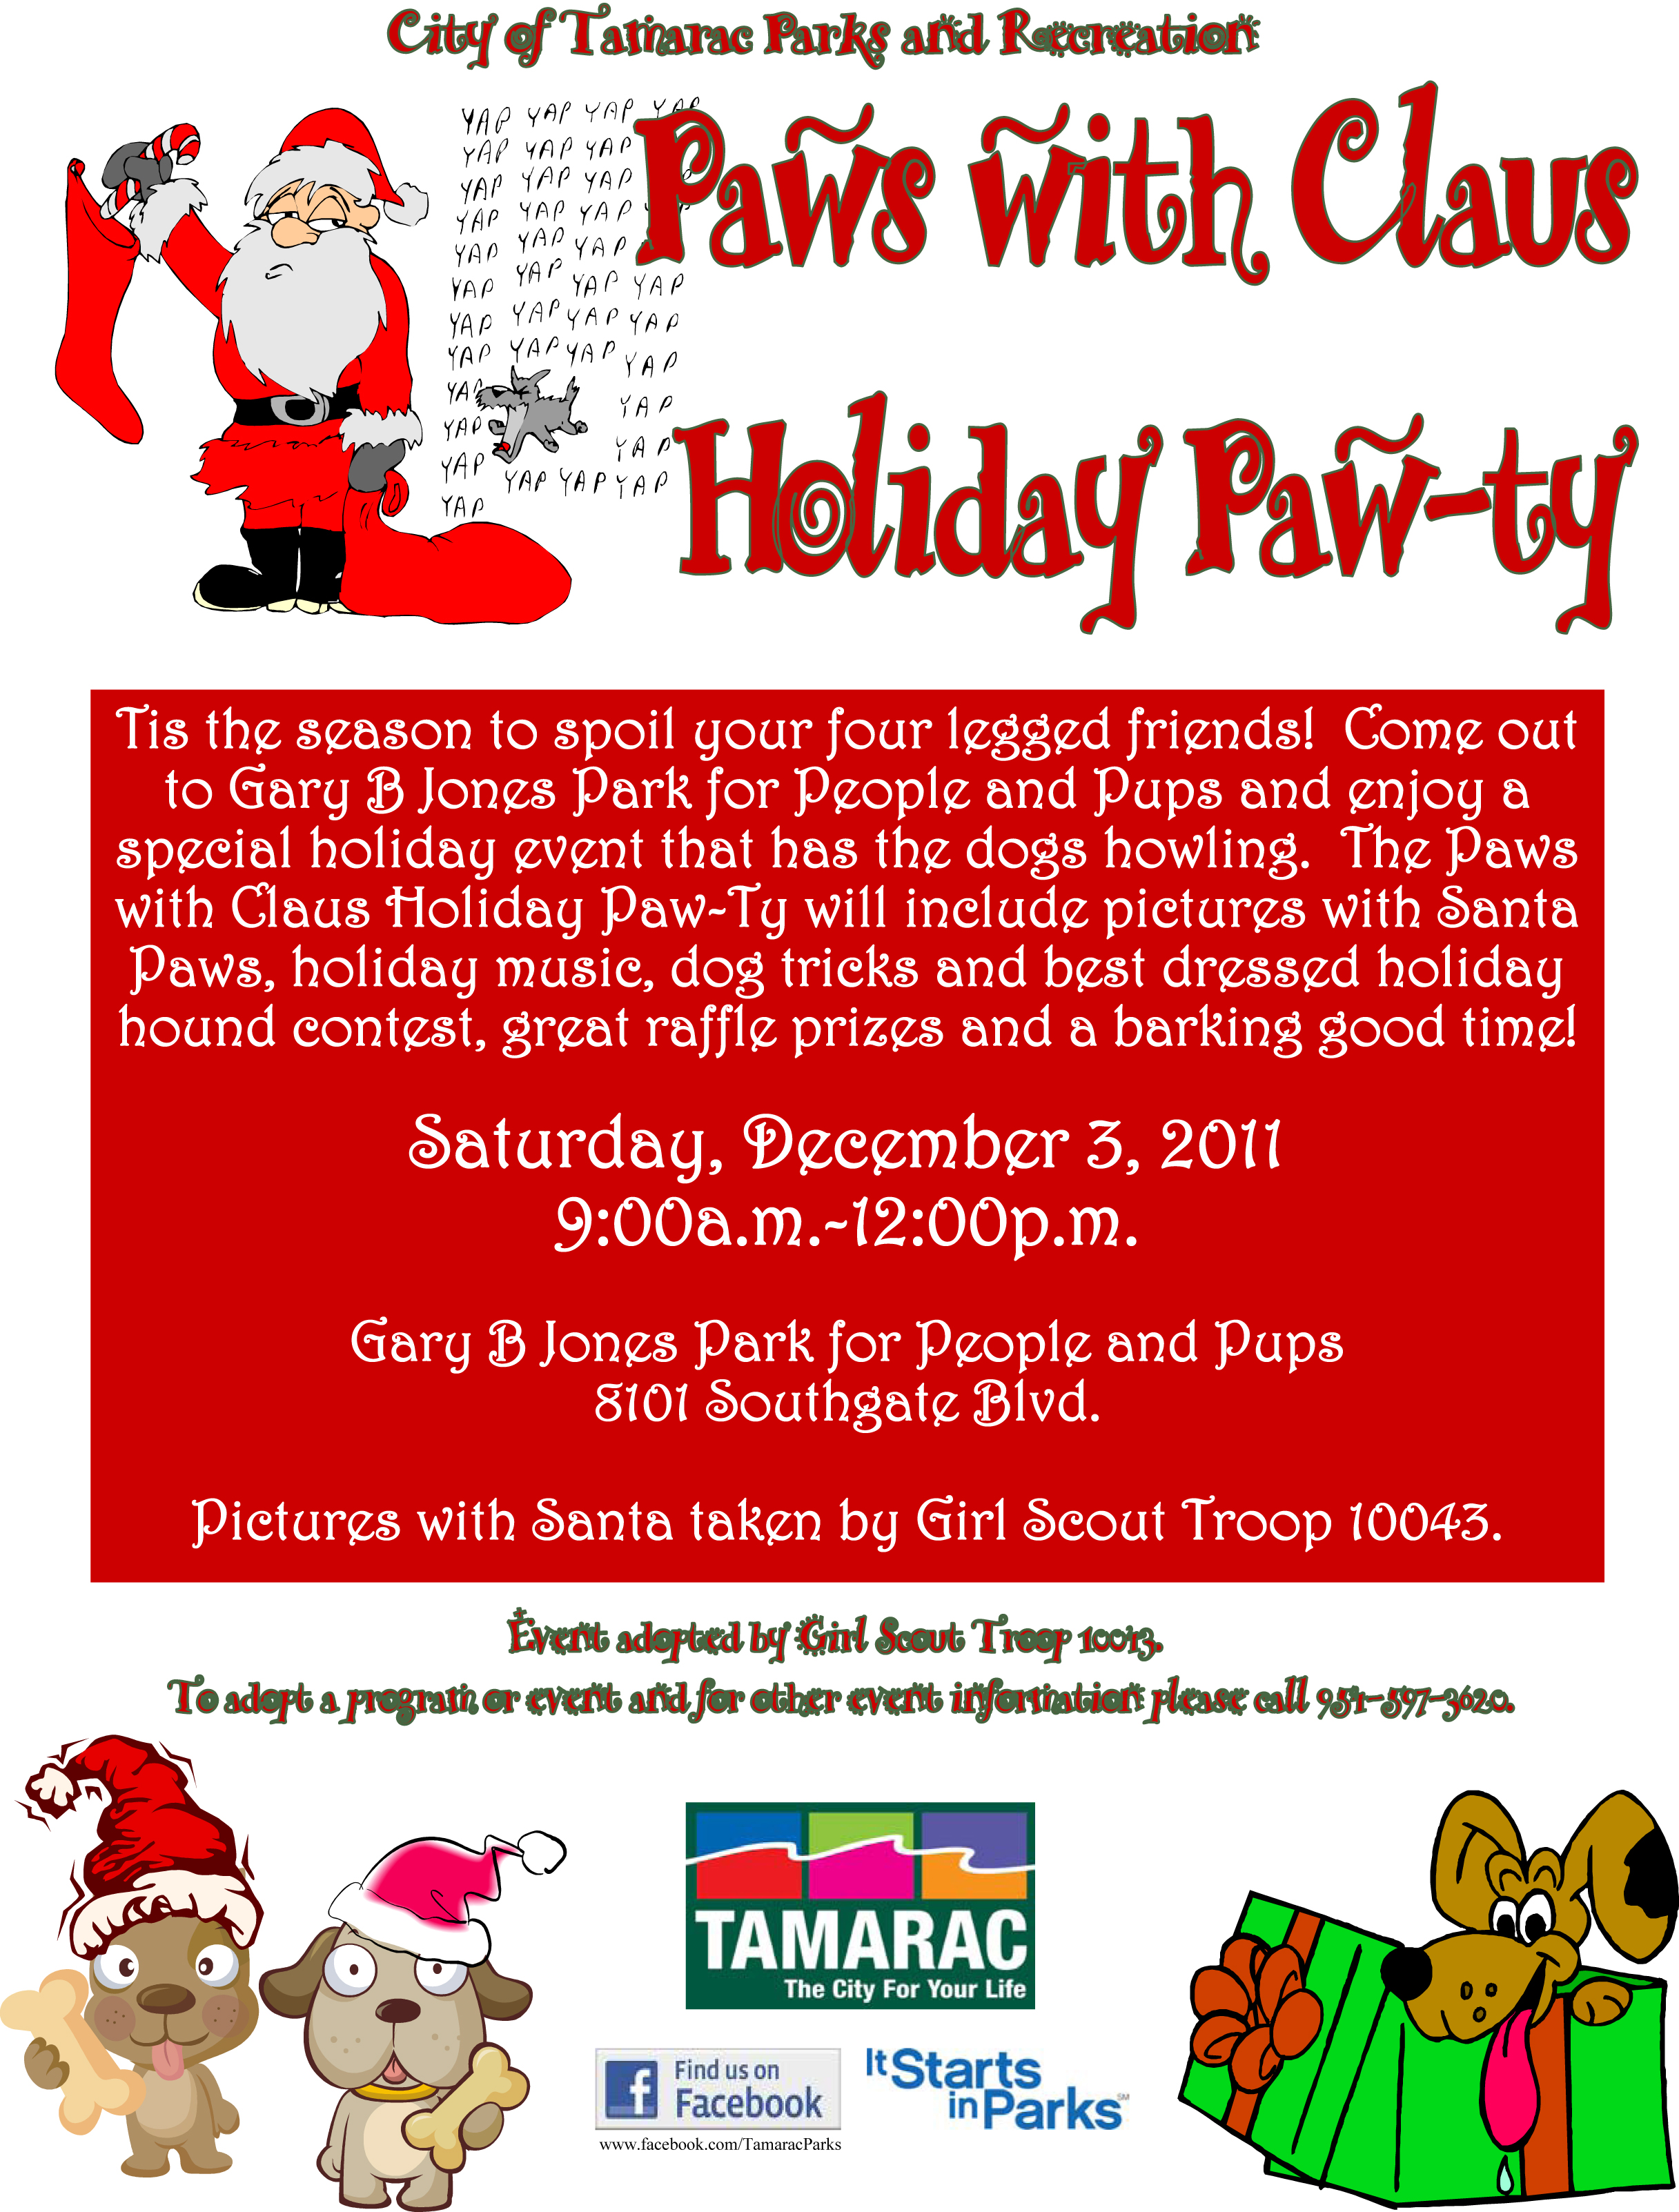 Holiday Paw-ty Flyer 2011